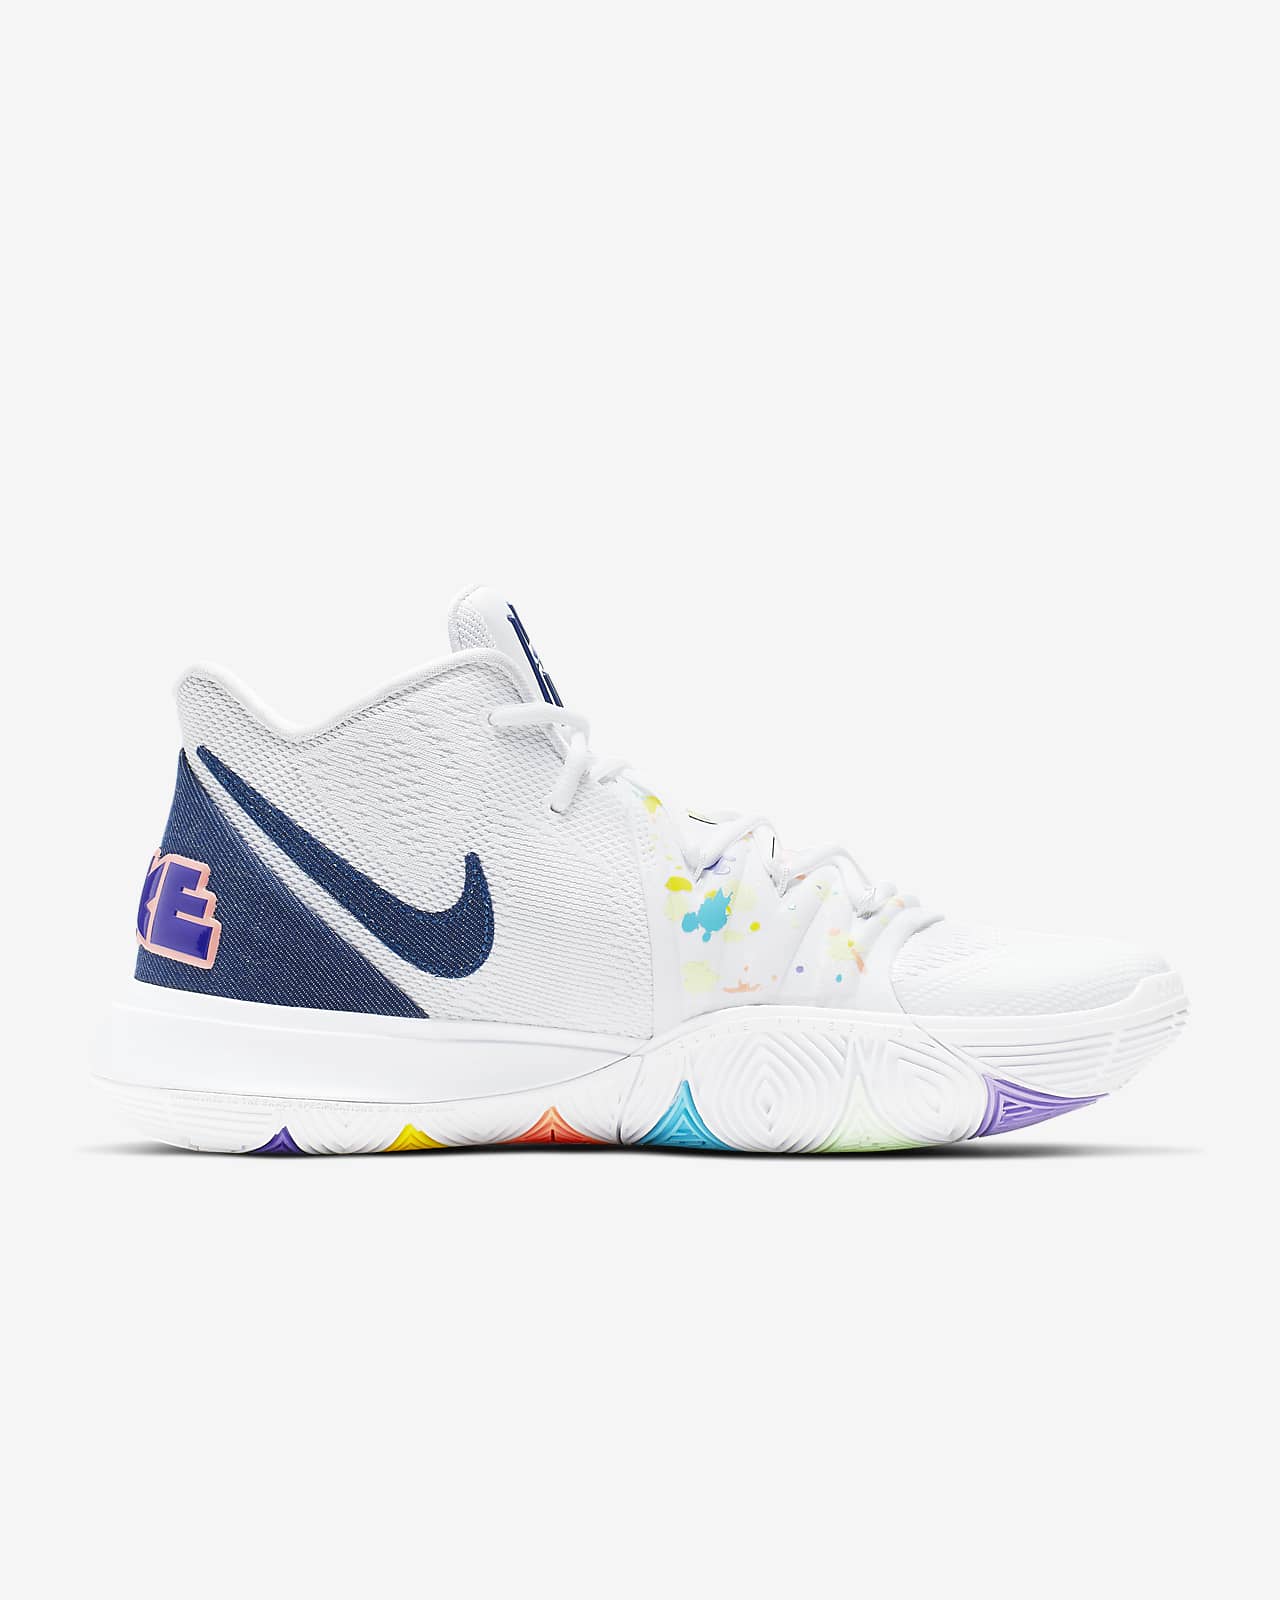 kyrie 5 youth basketball shoes